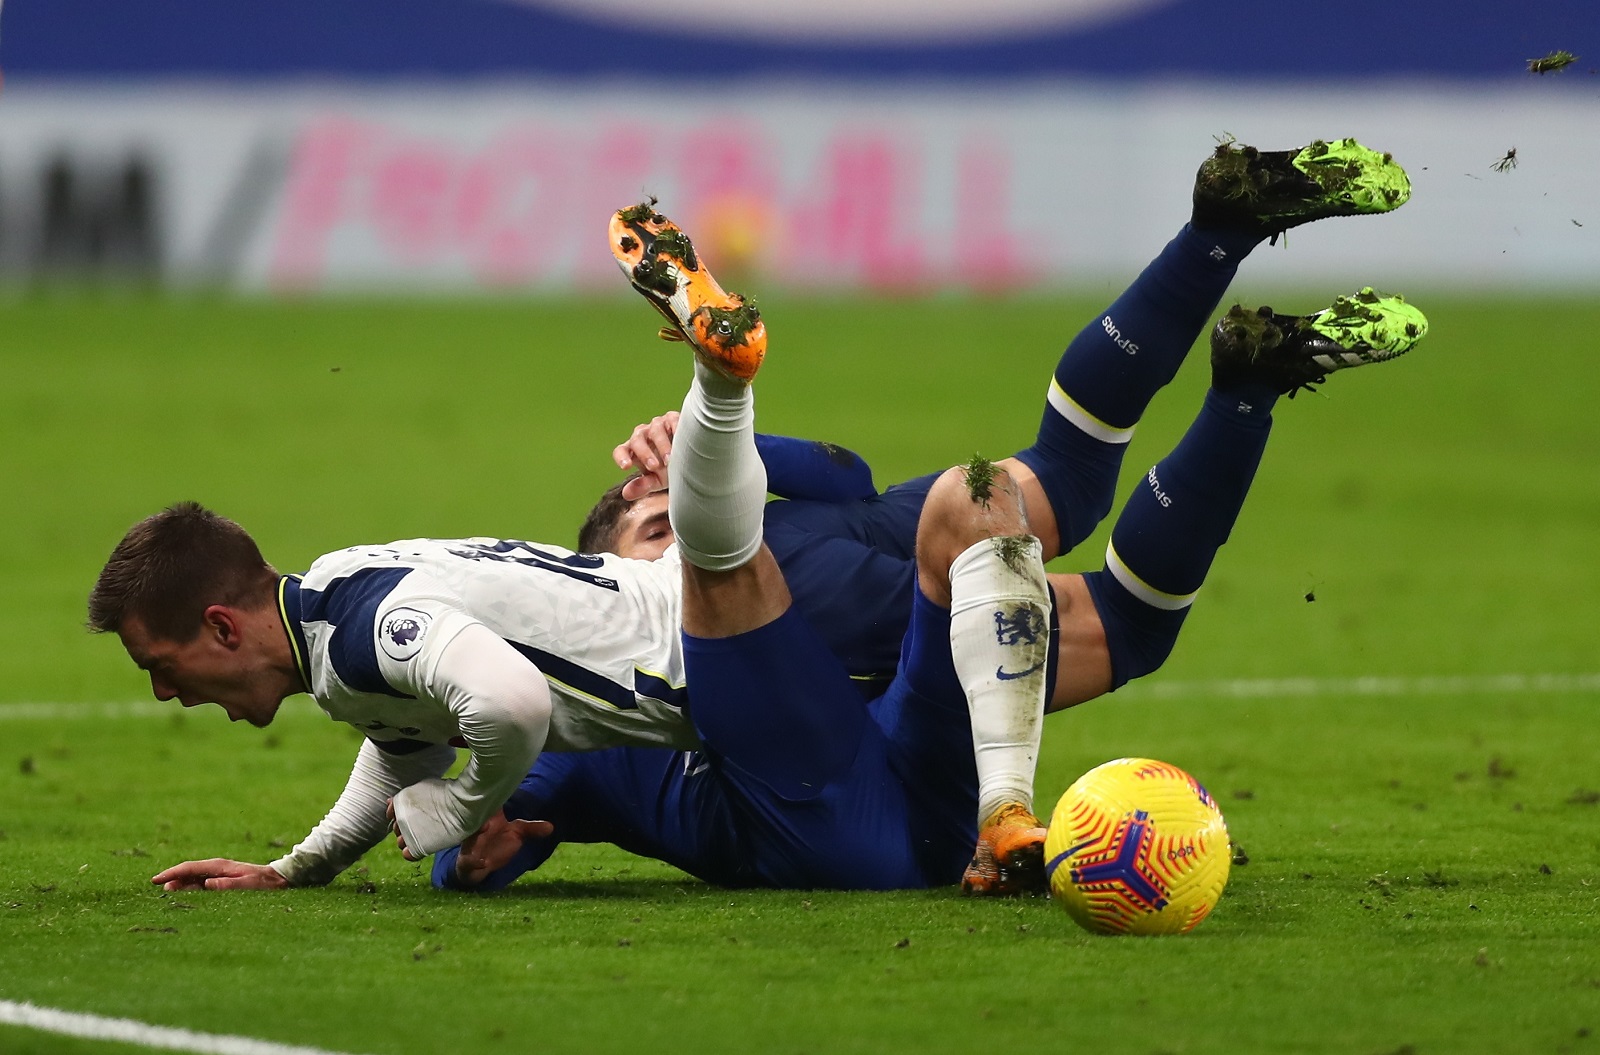 epa08851794 Chelsea's Christian Pulisic (down) in action with Tottenham's Giovani Lo Celso (up) during the English Premier League soccer match between Chelsea FC and Tottenham Hotspur in London, Britain, 29 November 2020.  EPA/Clive Rose / POOL EDITORIAL USE ONLY. No use with unauthorized audio, video, data, fixture lists, club/league logos or 'live' services. Online in-match use limited to 120 images, no video emulation. No use in betting, games or single club/league/player publications.